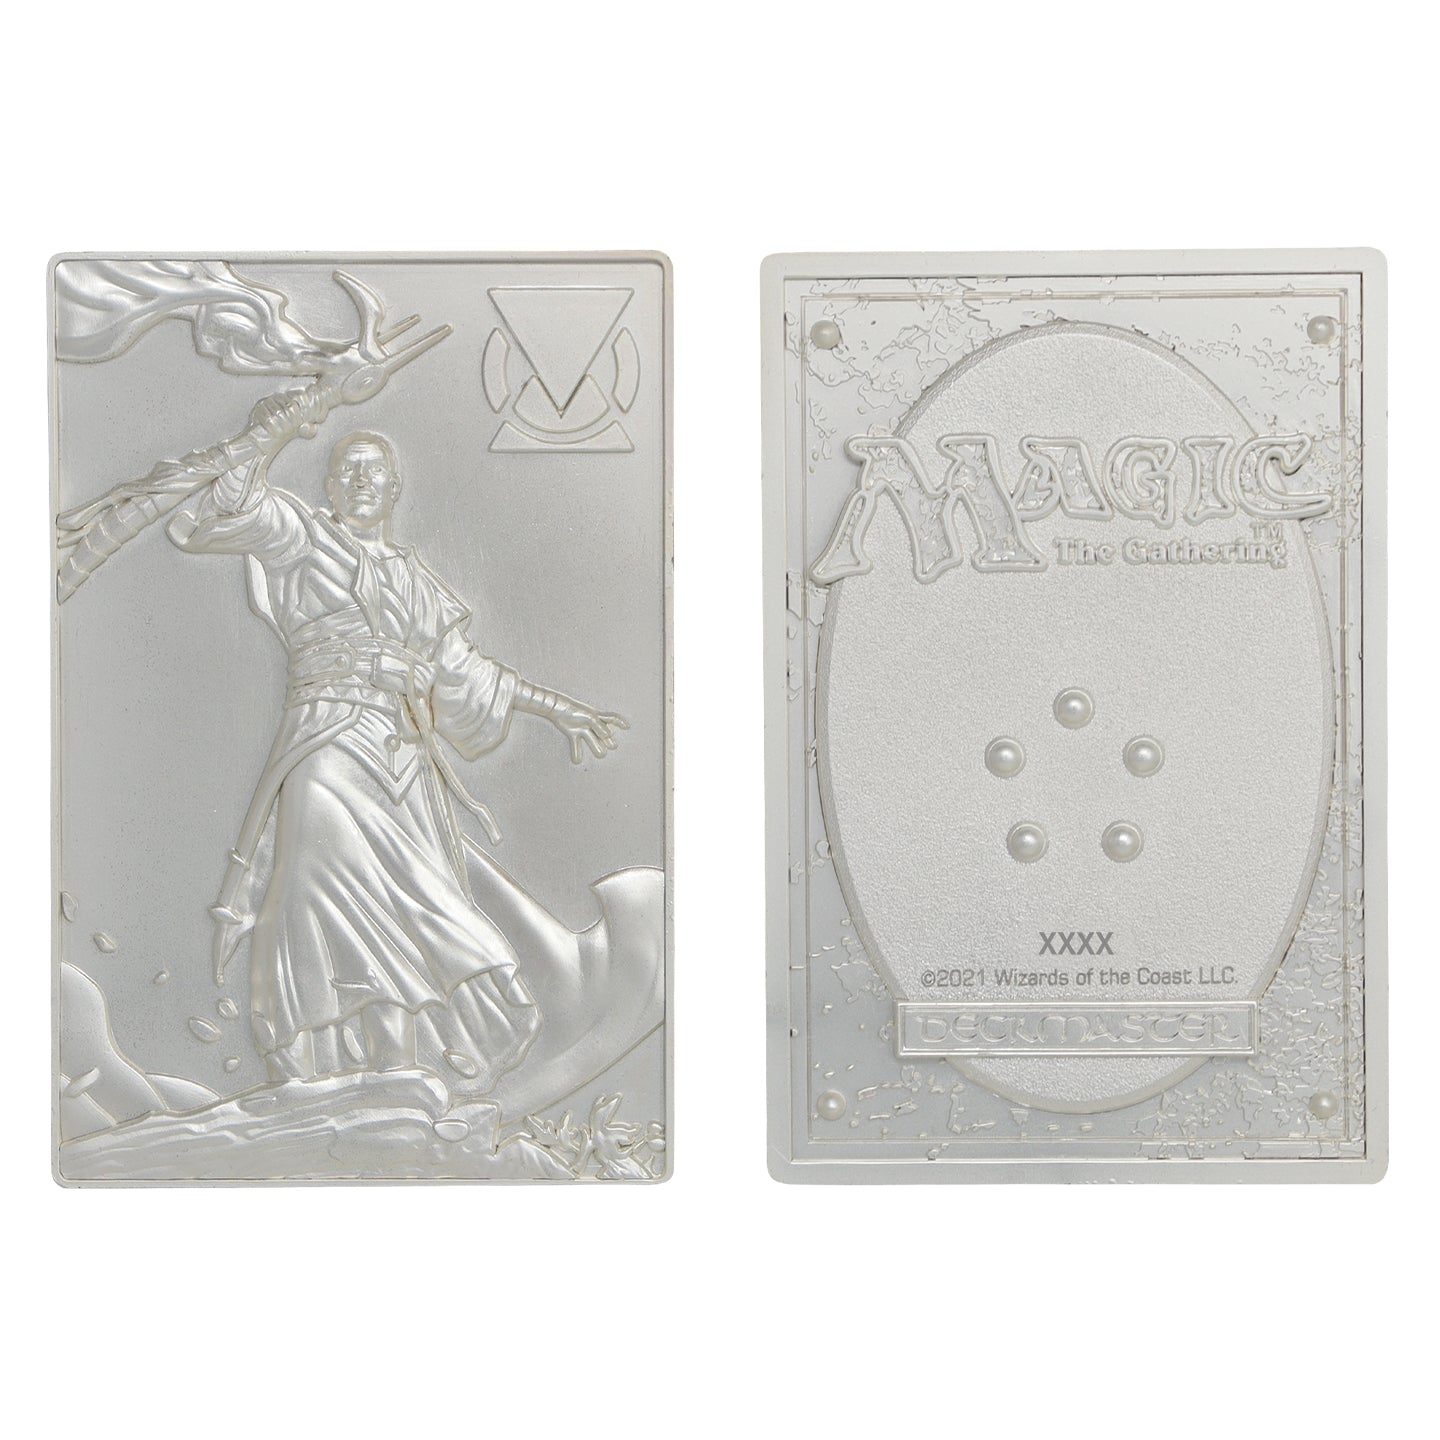 Magic the Gathering Limited Edition .999 Silver Plated Teferi Ingot